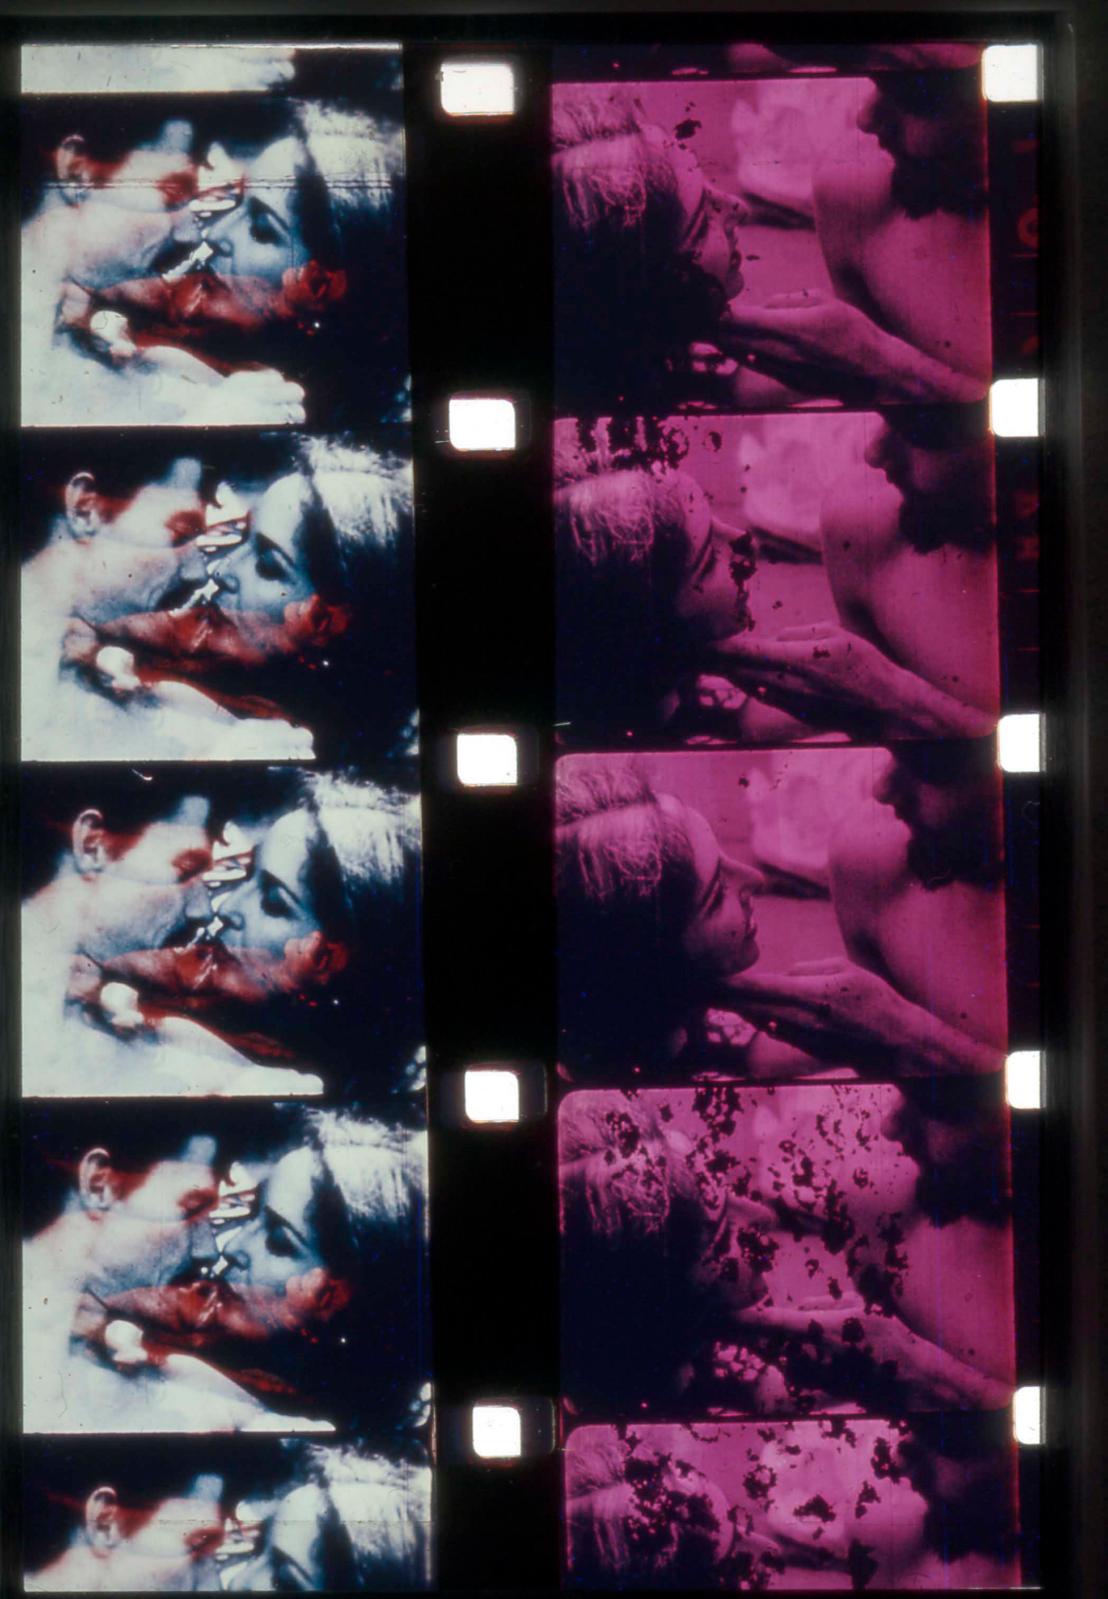 Carolee Schneemann. Two film strips from Fuses,1964–67, 16 mm film transferred to HD video, color, silent, 29:51 min. Original film burned